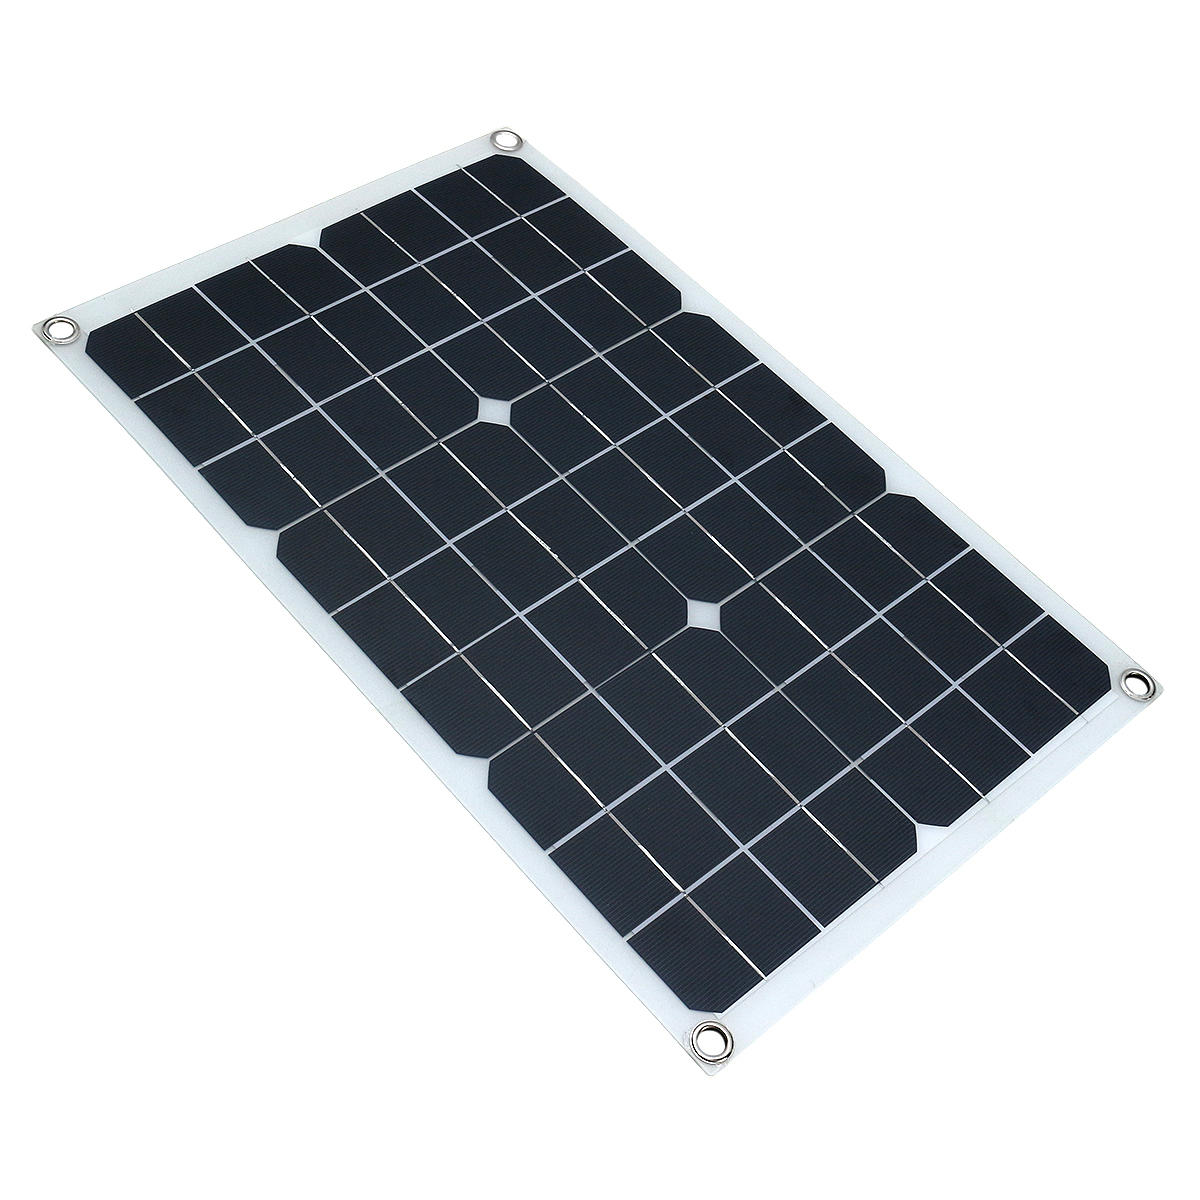 18V-100W-Solar-Panel-Portable-Solar-Power-Bank-for-Outdoors-Camping-Boat-Smartphones-Battery-Charger-1809958-5